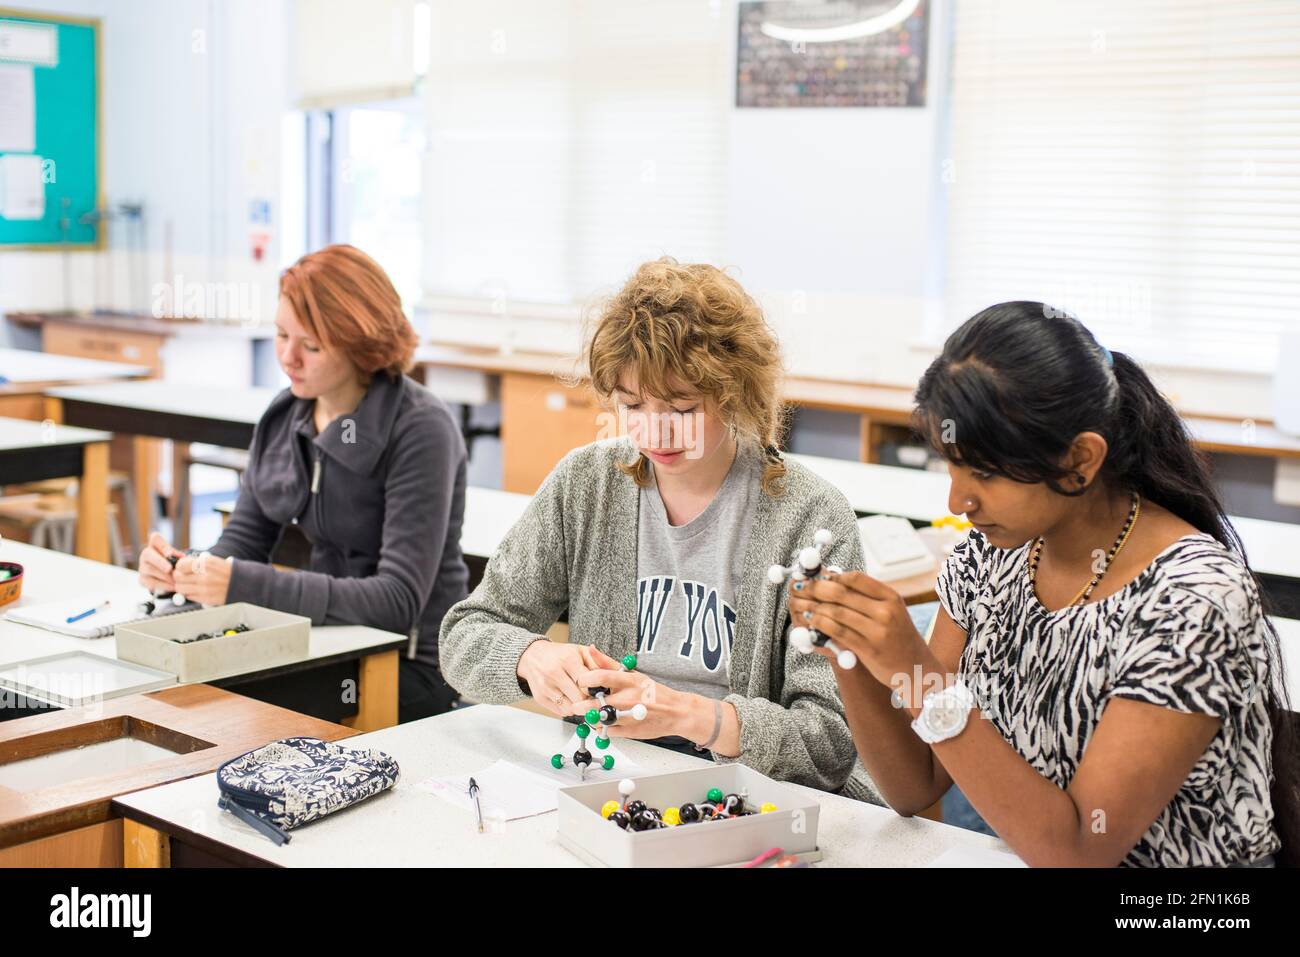 Sixth Form Students, Young people in education, two teenagers collaborating, 3 young females working with molekular model kit in chemistry Stock Photo